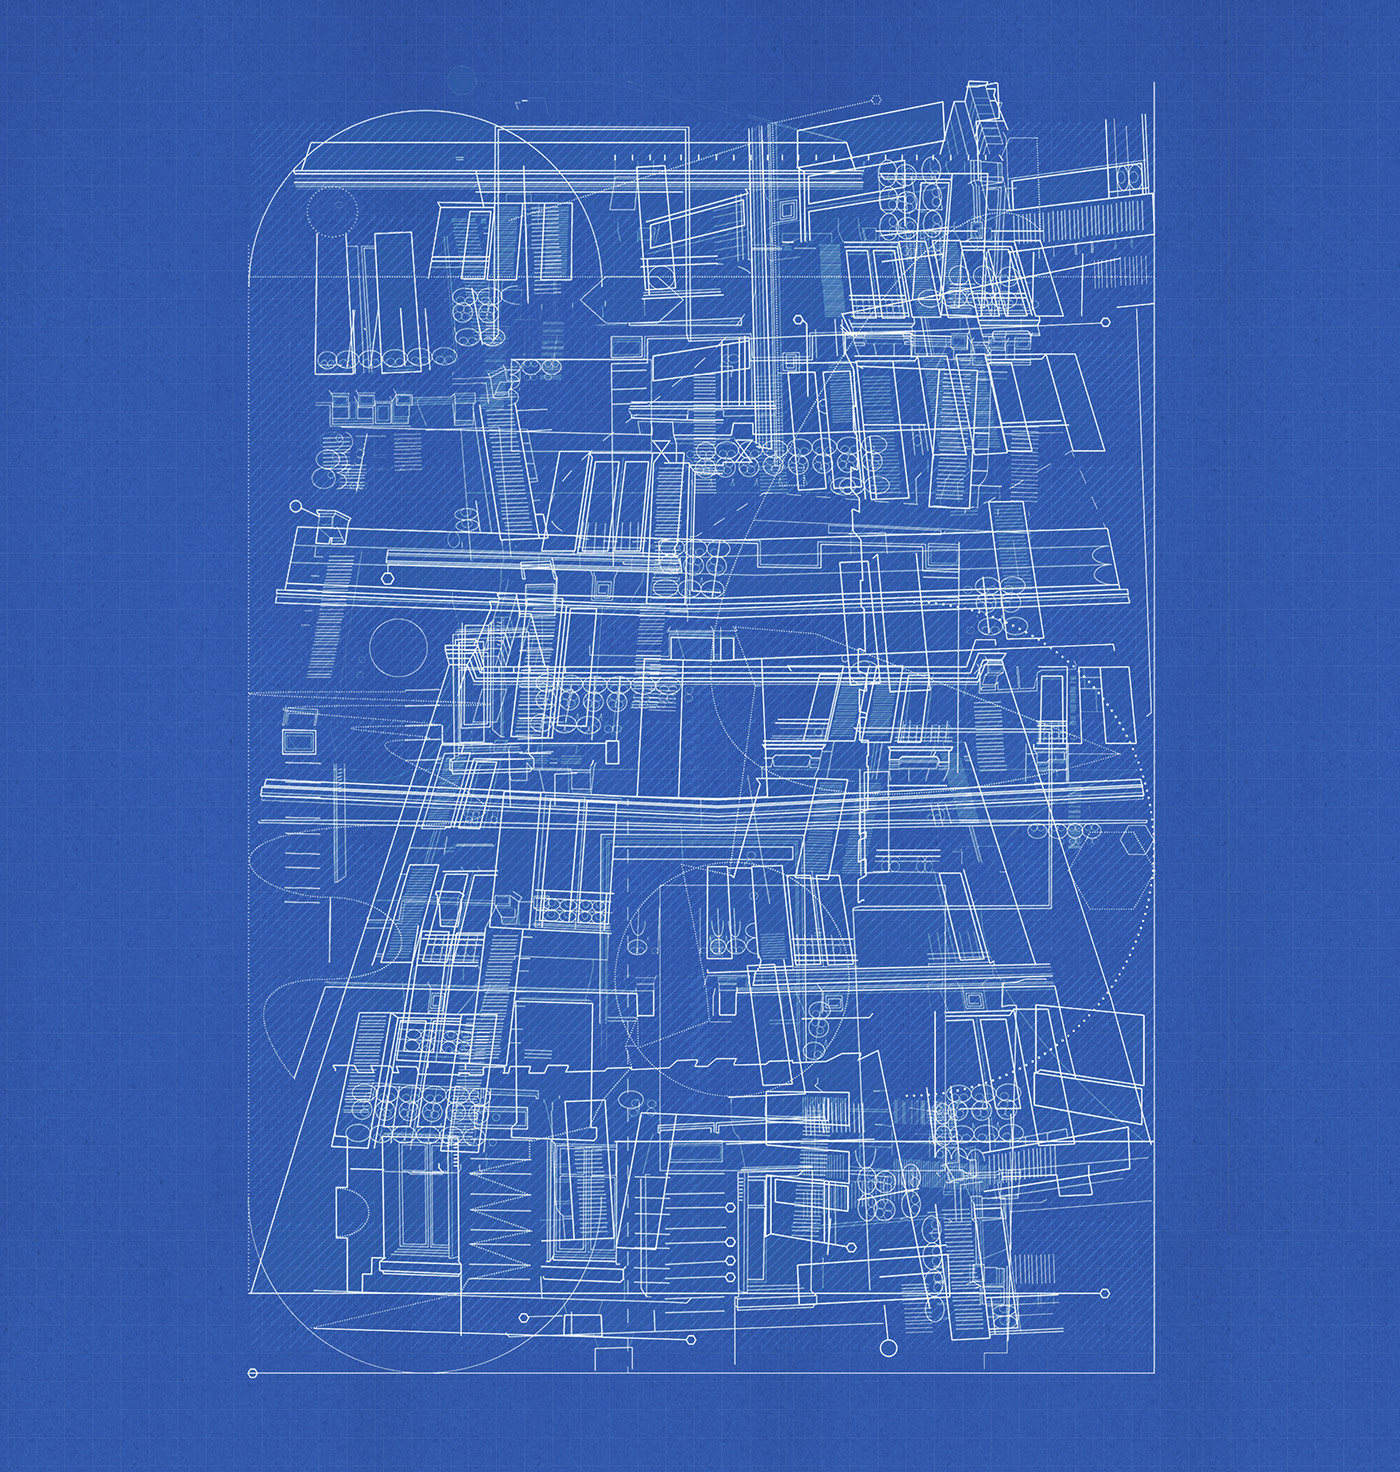 Blueprints / Architectural Drawings on Behance